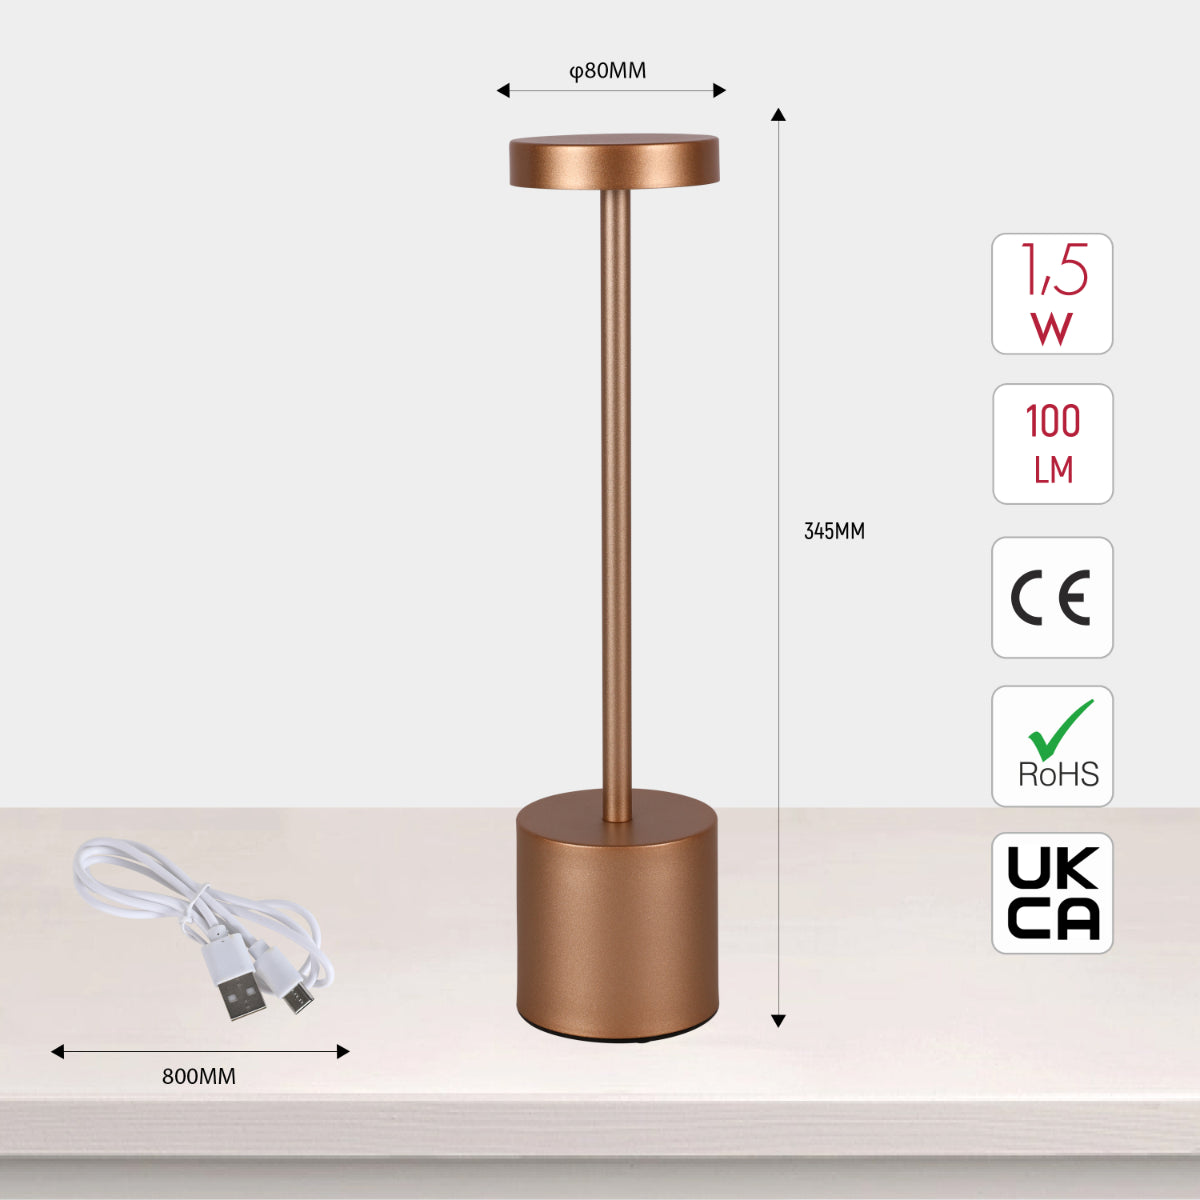 Size and certifications of Sleek Portable LED Column Lamp with CCT Control 130-03742